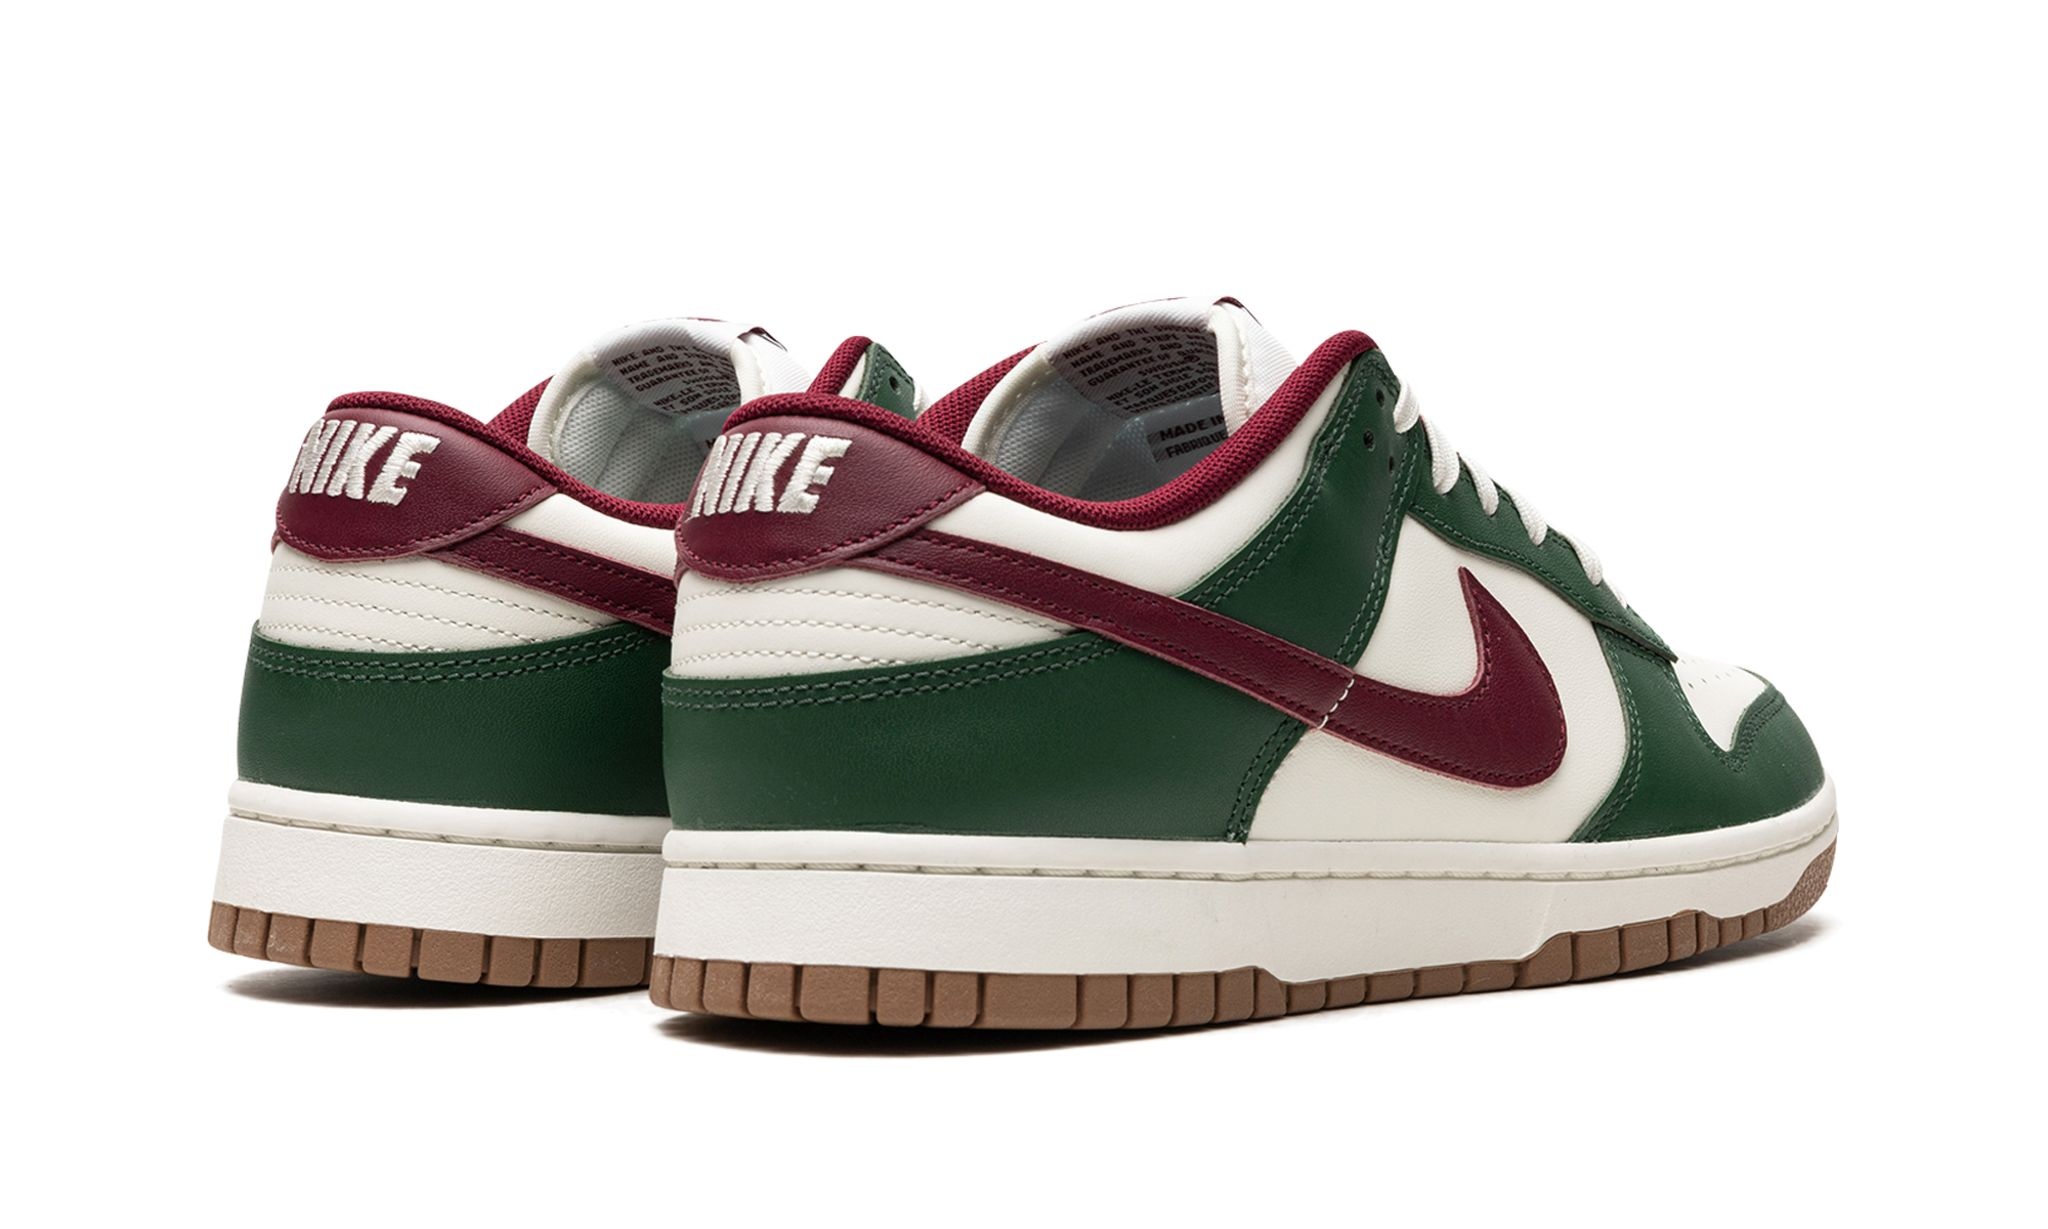 Dunk Low Retro "Gorge Green / Team Red" - 3